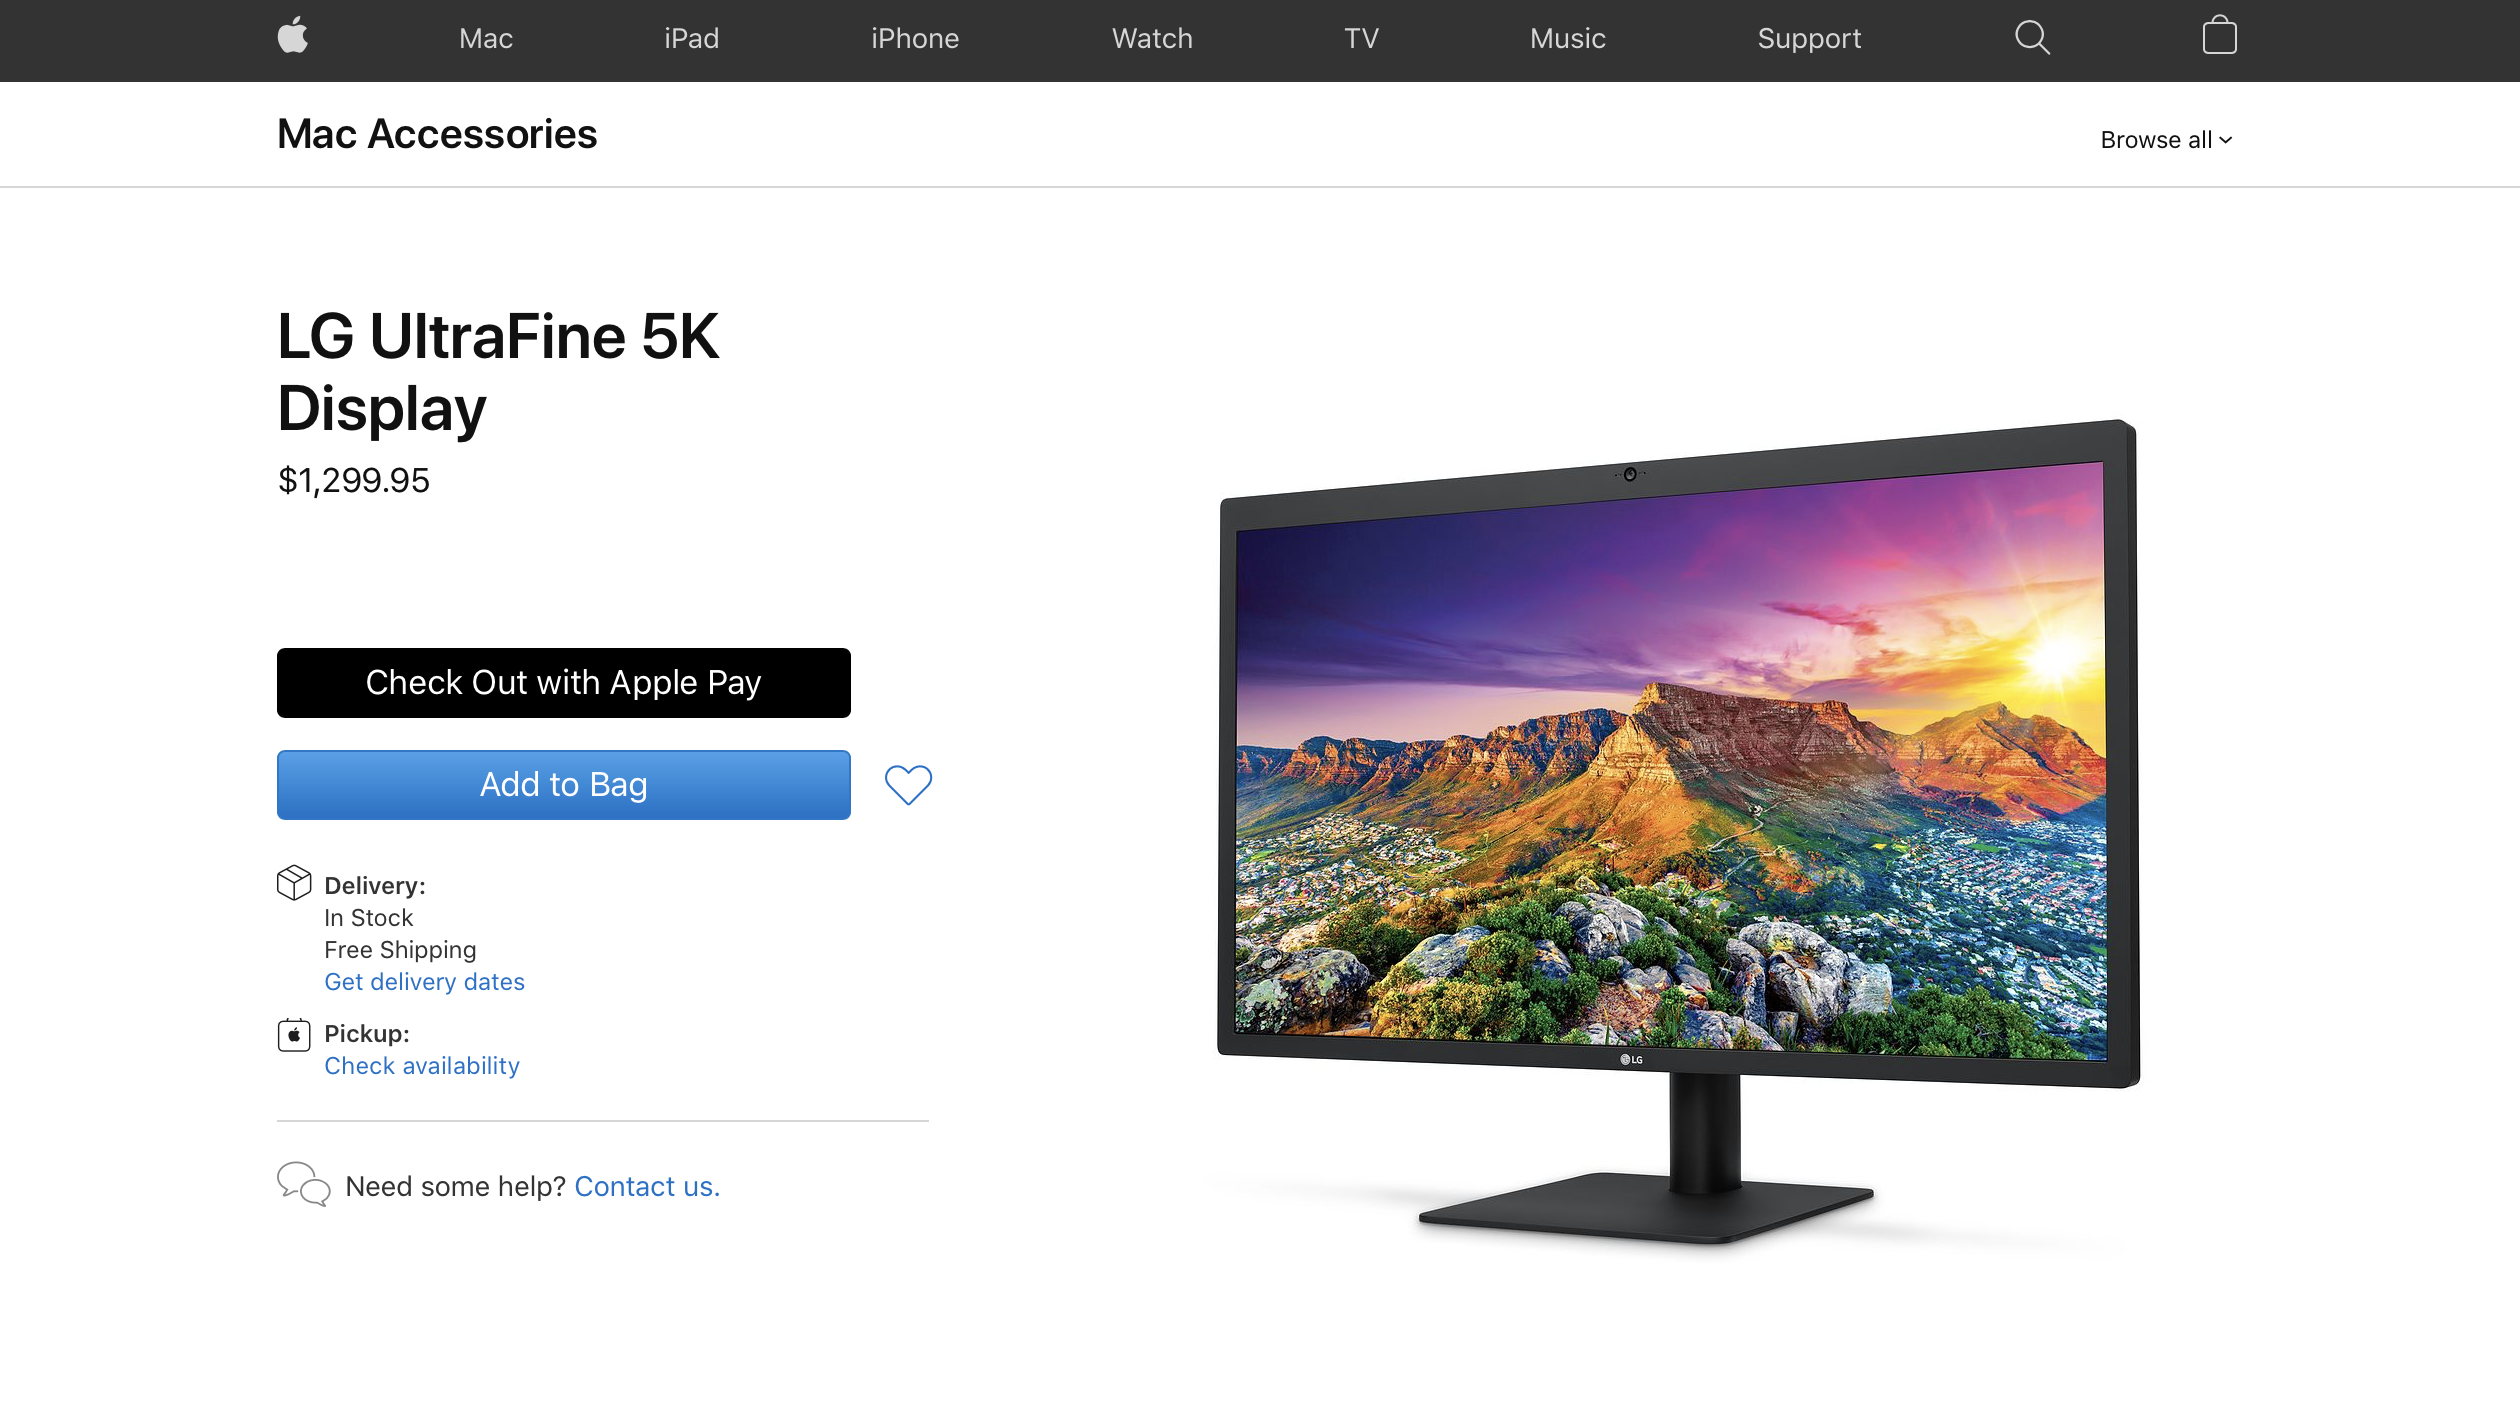 LG UltraFine 5K 27-inch screen removed from Apple online stores across Europe